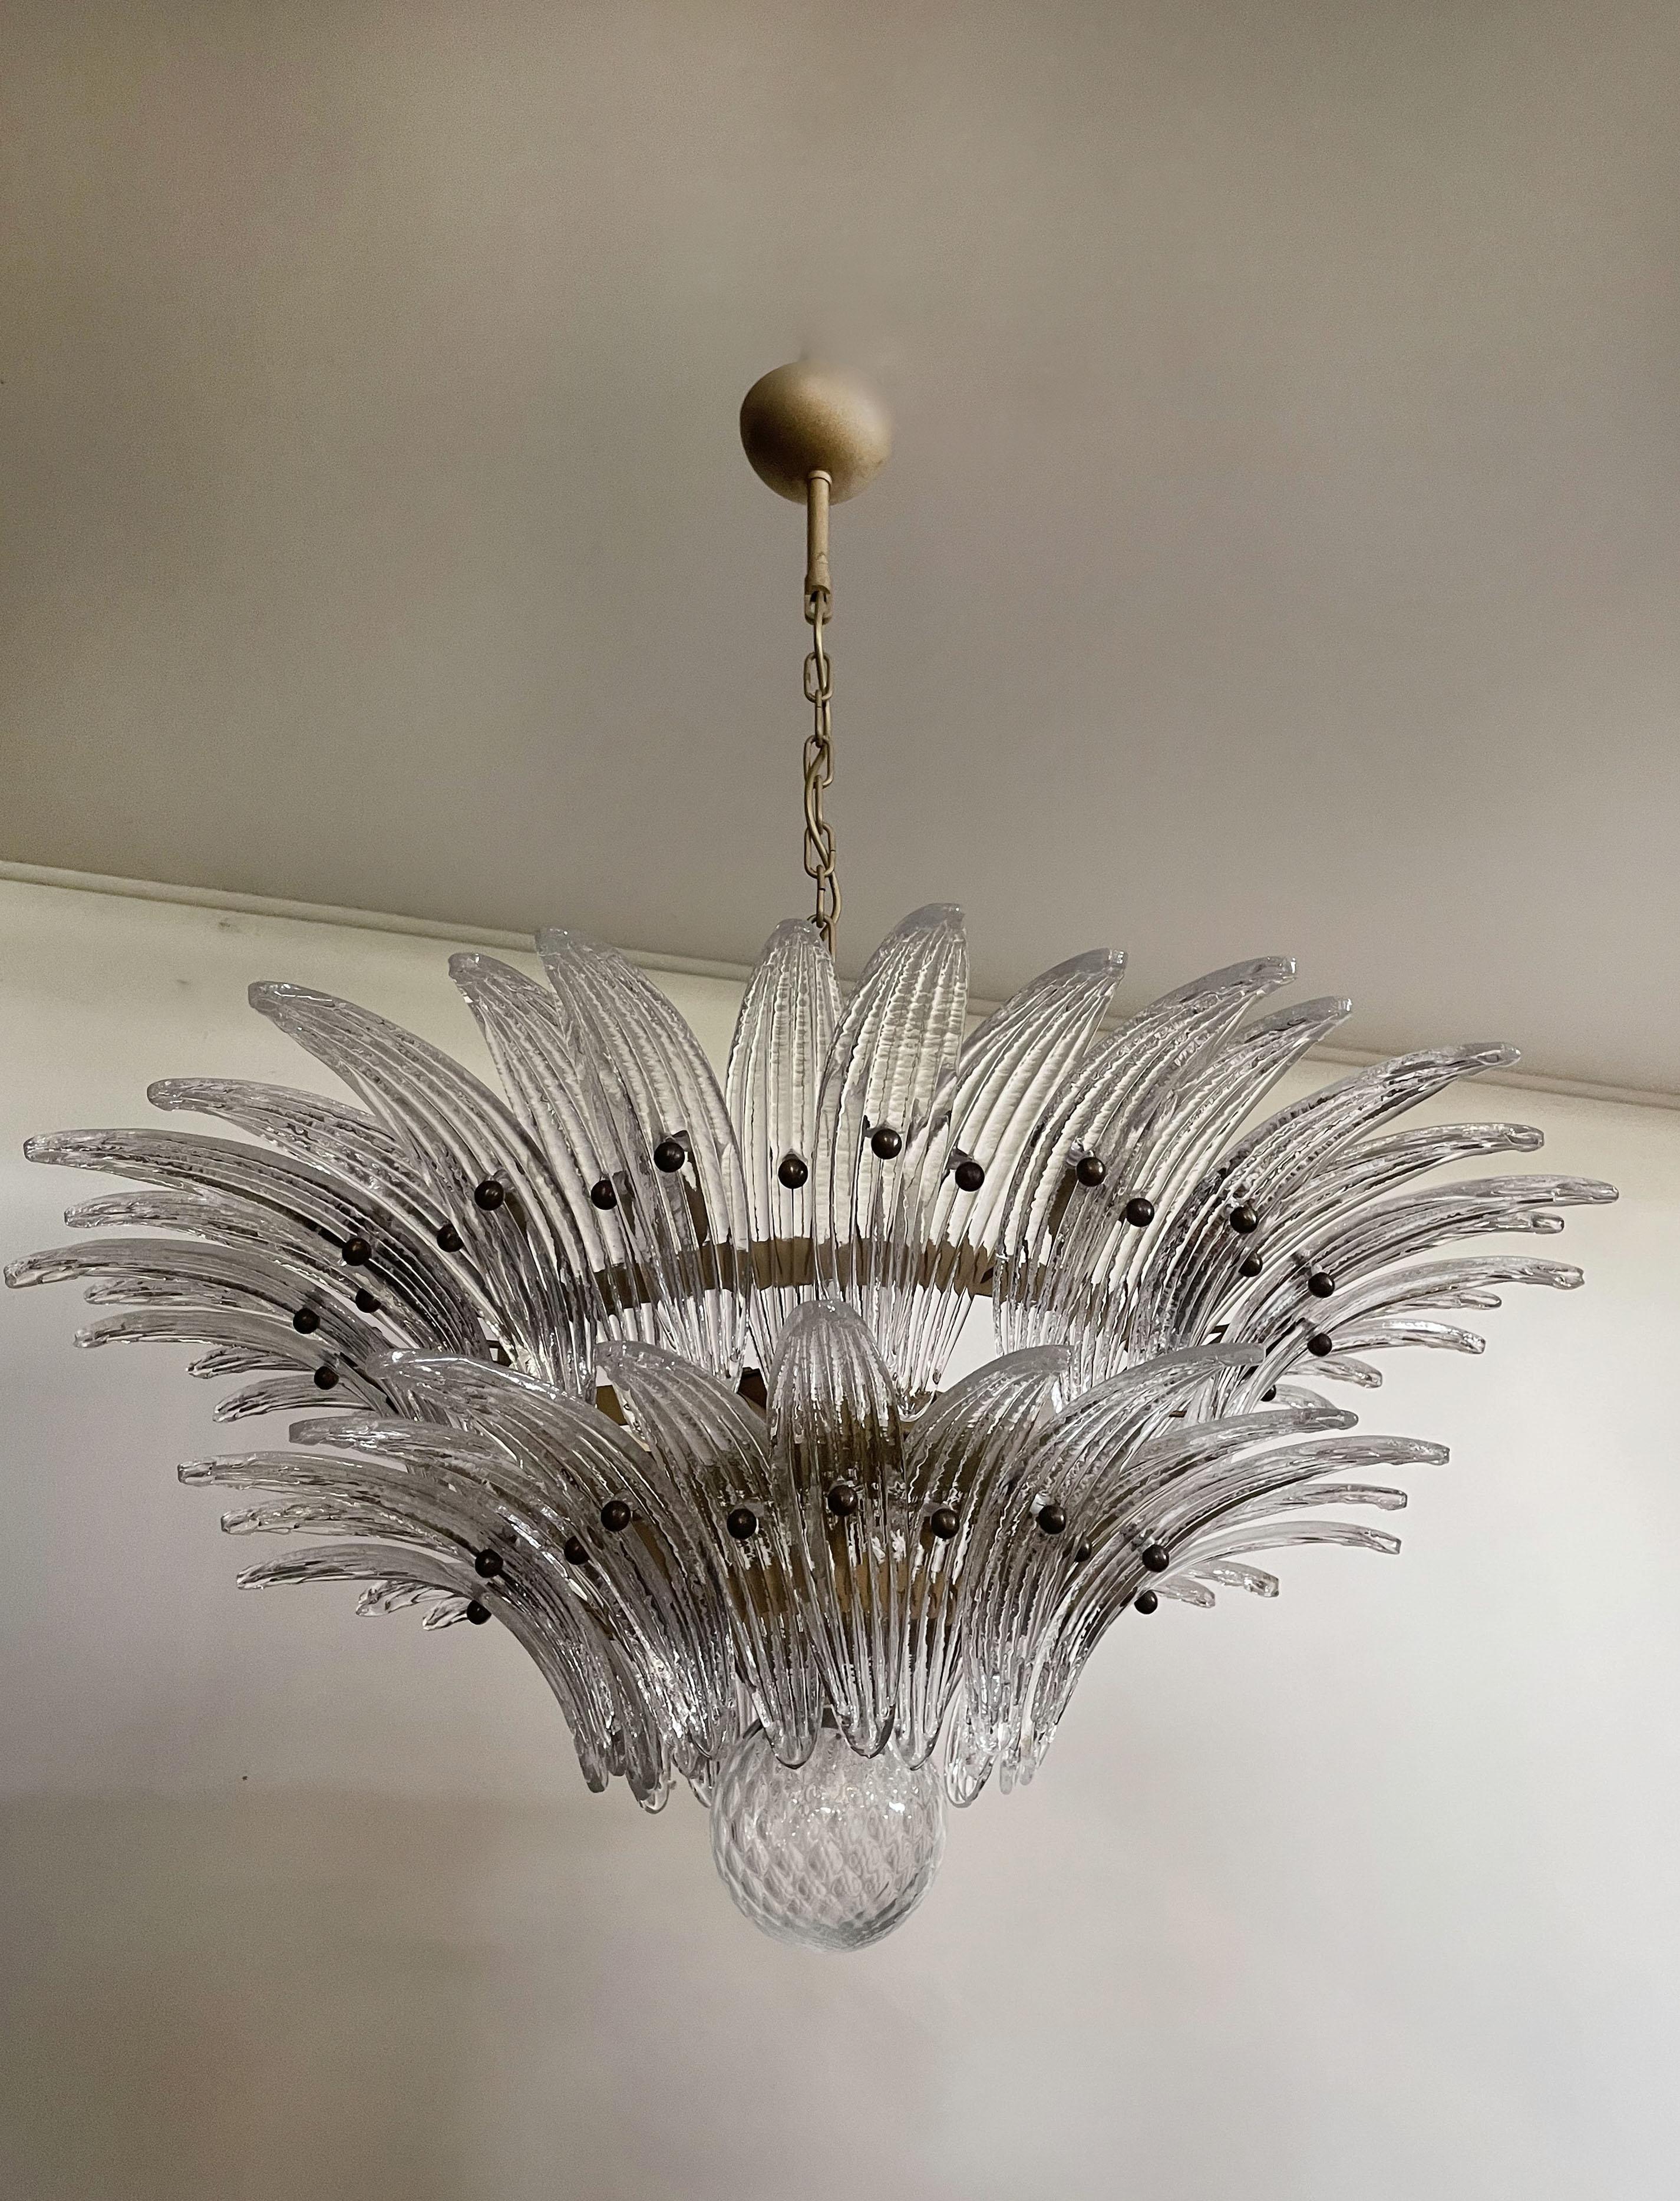 Luxury and GENUINE Murano Glass chandelier. HAND MADE IN MURANO. It made by 58 Murano crystal glasses in a gold metal frame. The chandelier has also a Murano glass ball in the end of the lamp. Murano blown glass in a traditional way.
Period: 1970's